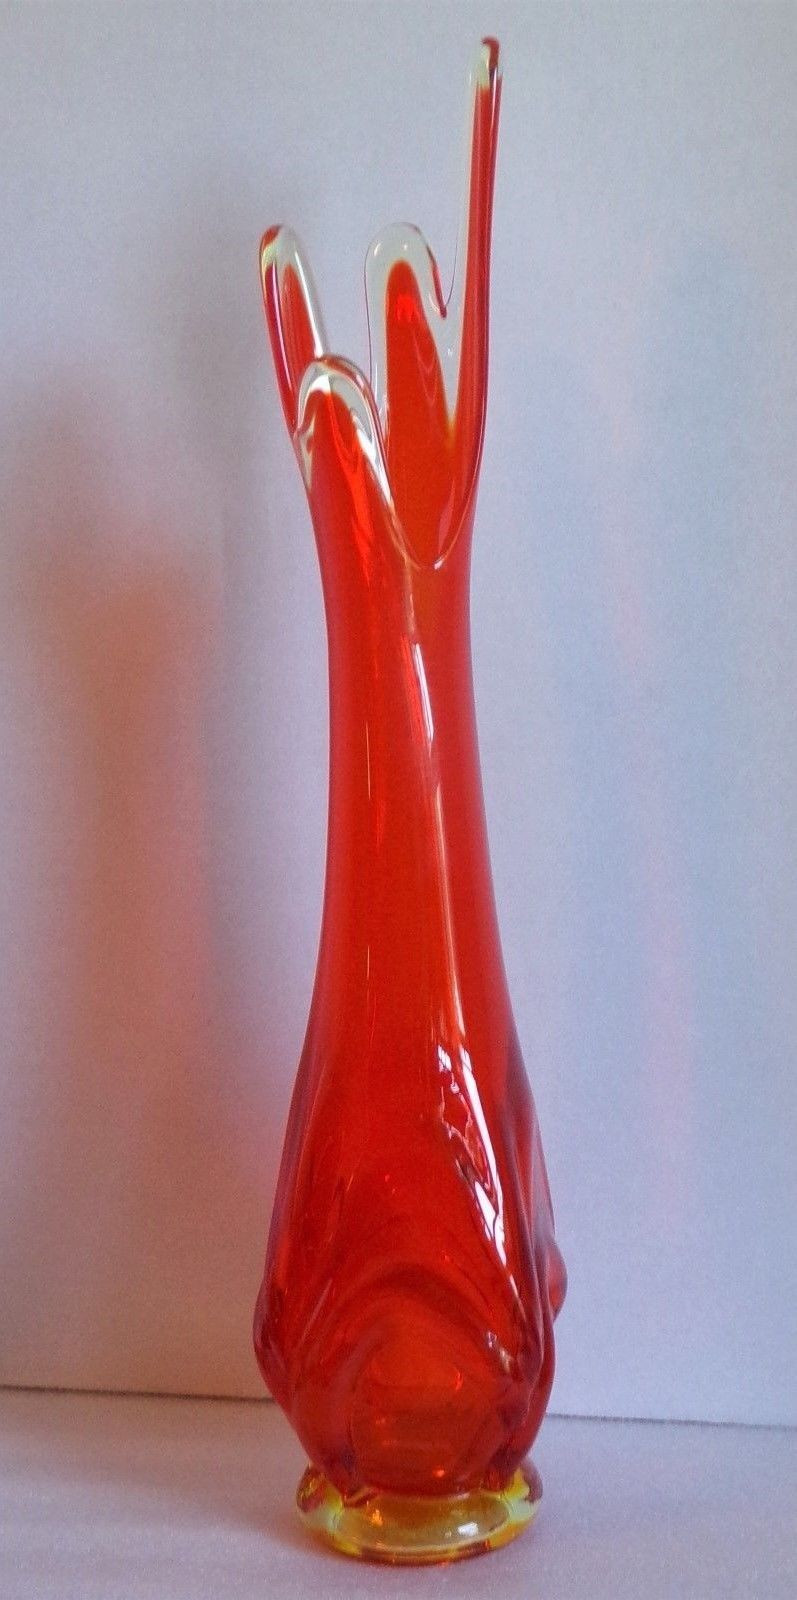 22 Awesome Glass Pedestal Bowl Vase 2023 free download glass pedestal bowl vase of viking bud vase amberina vase mid century art glass red amber with regard to vintage viking hand blown swung art glass pedestal floor vase orange amberina ebay